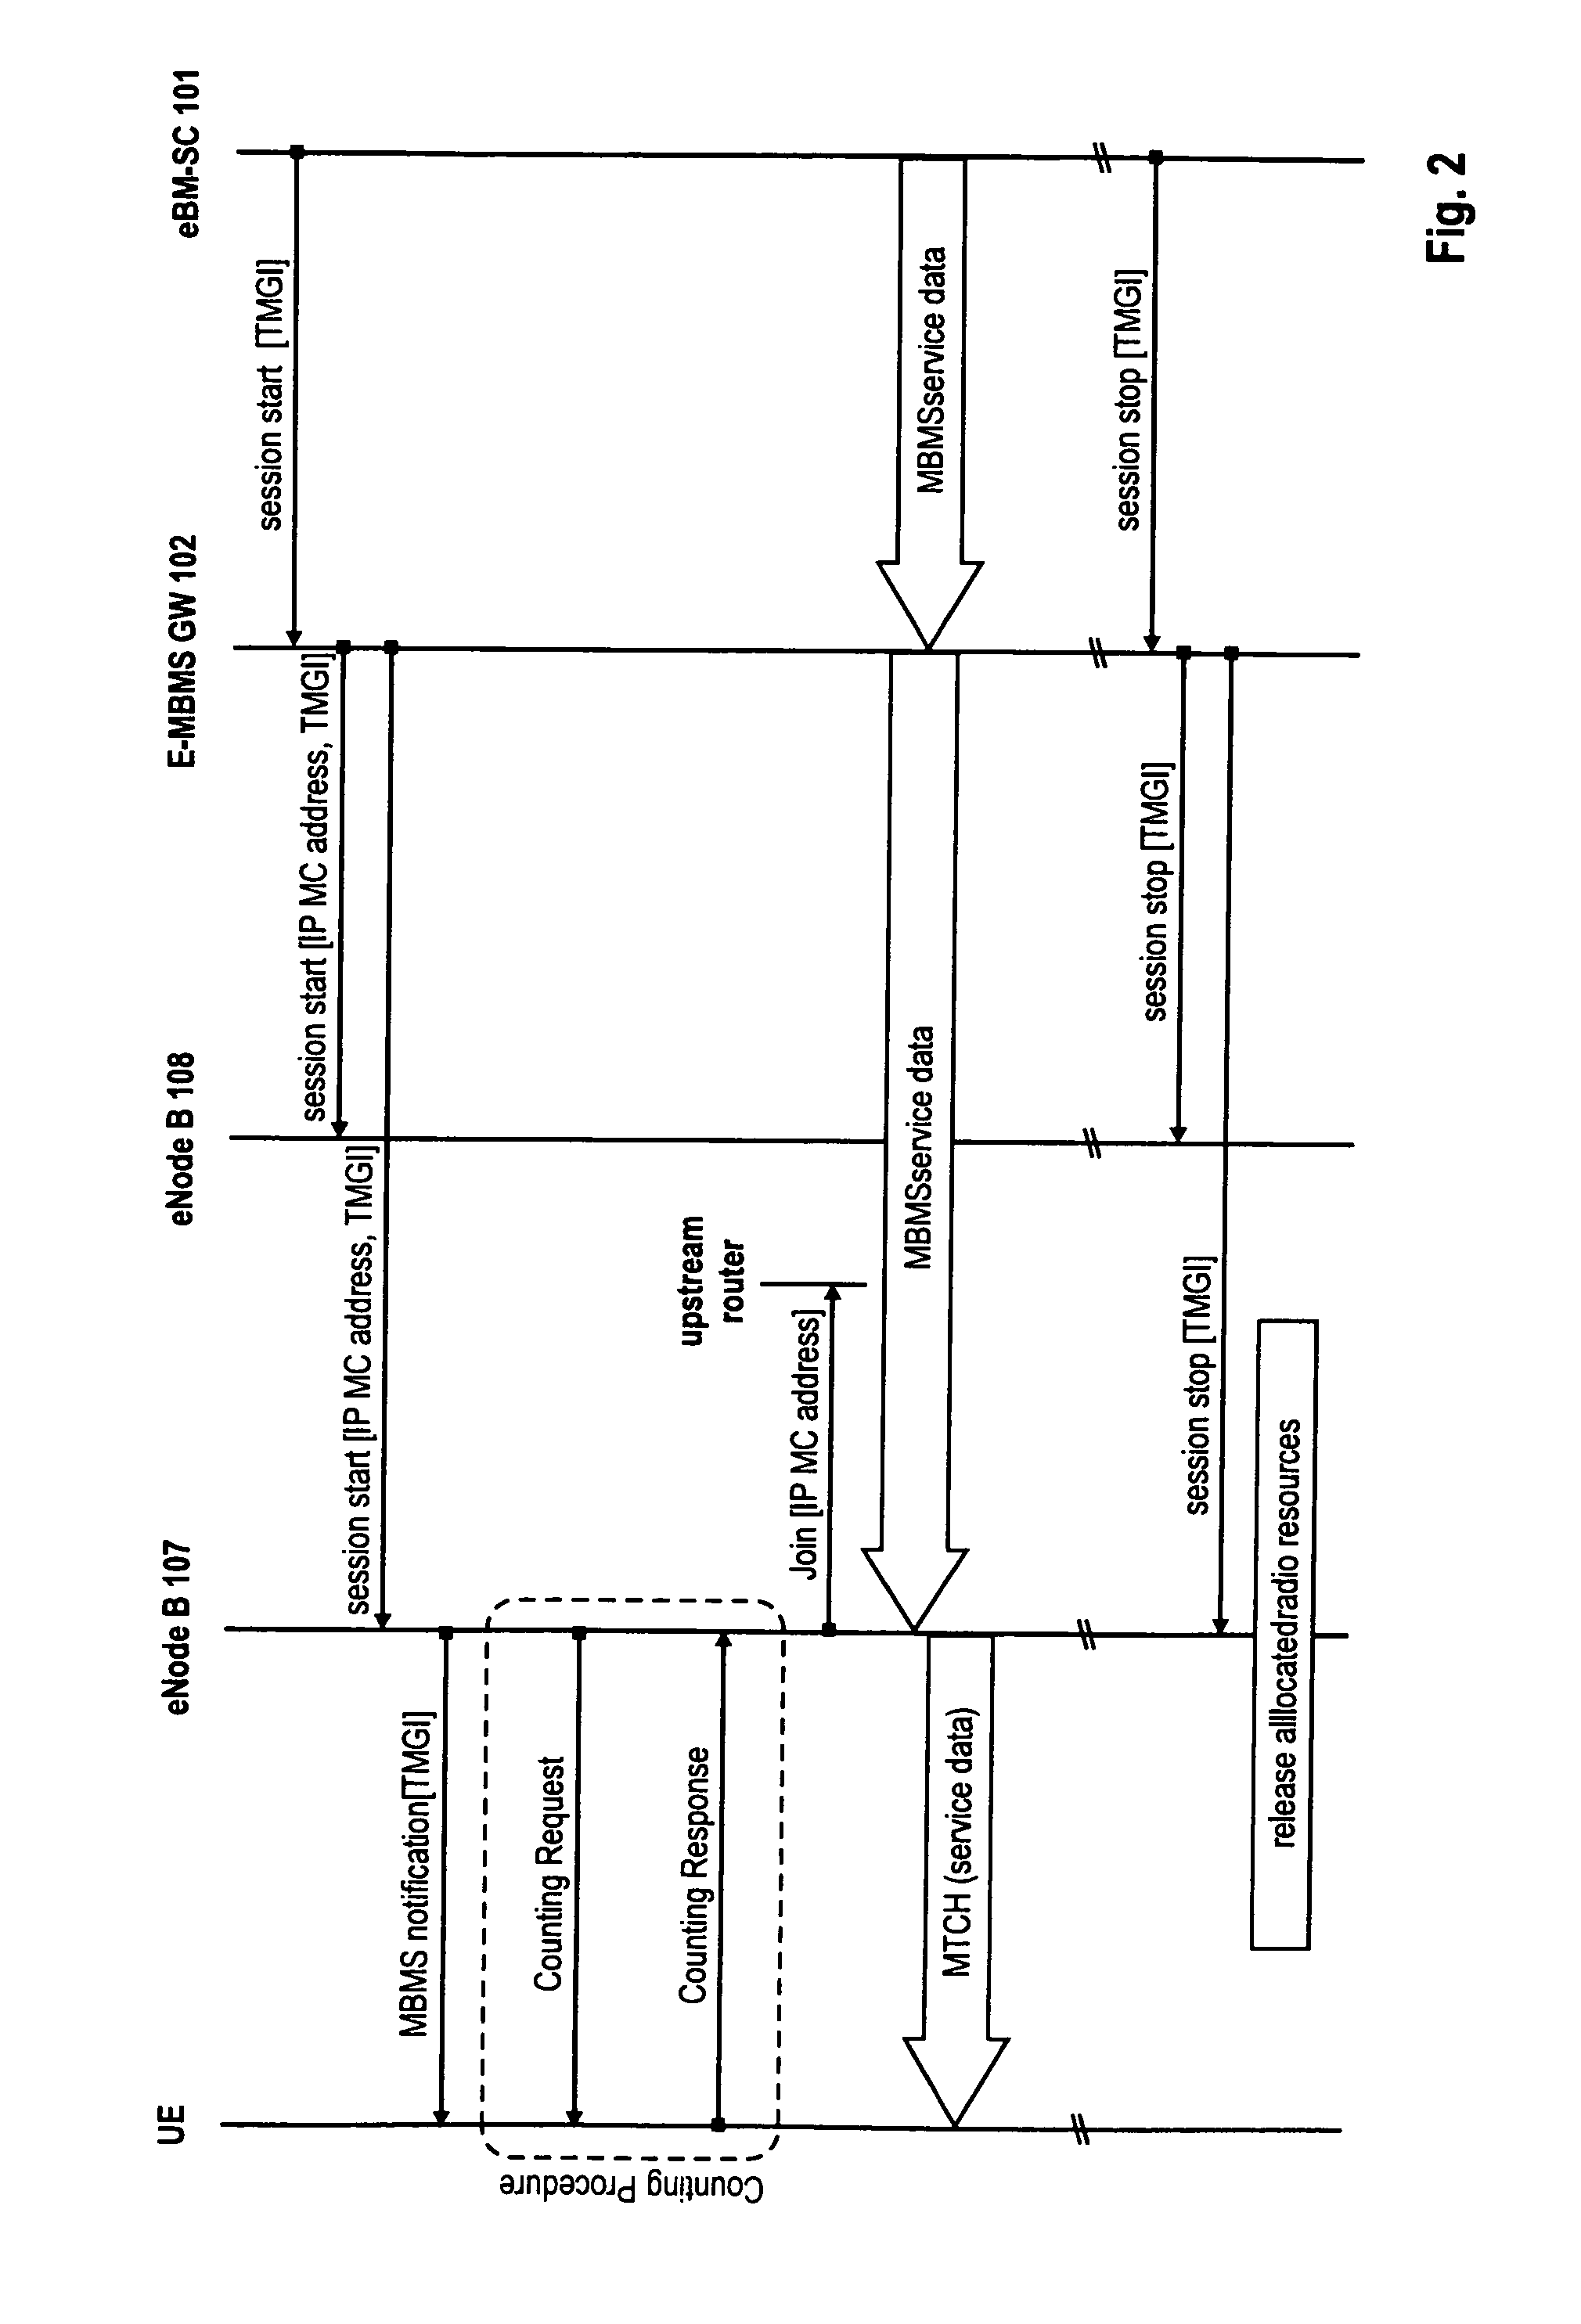 Management of session control signaling for multicast/broadcast services